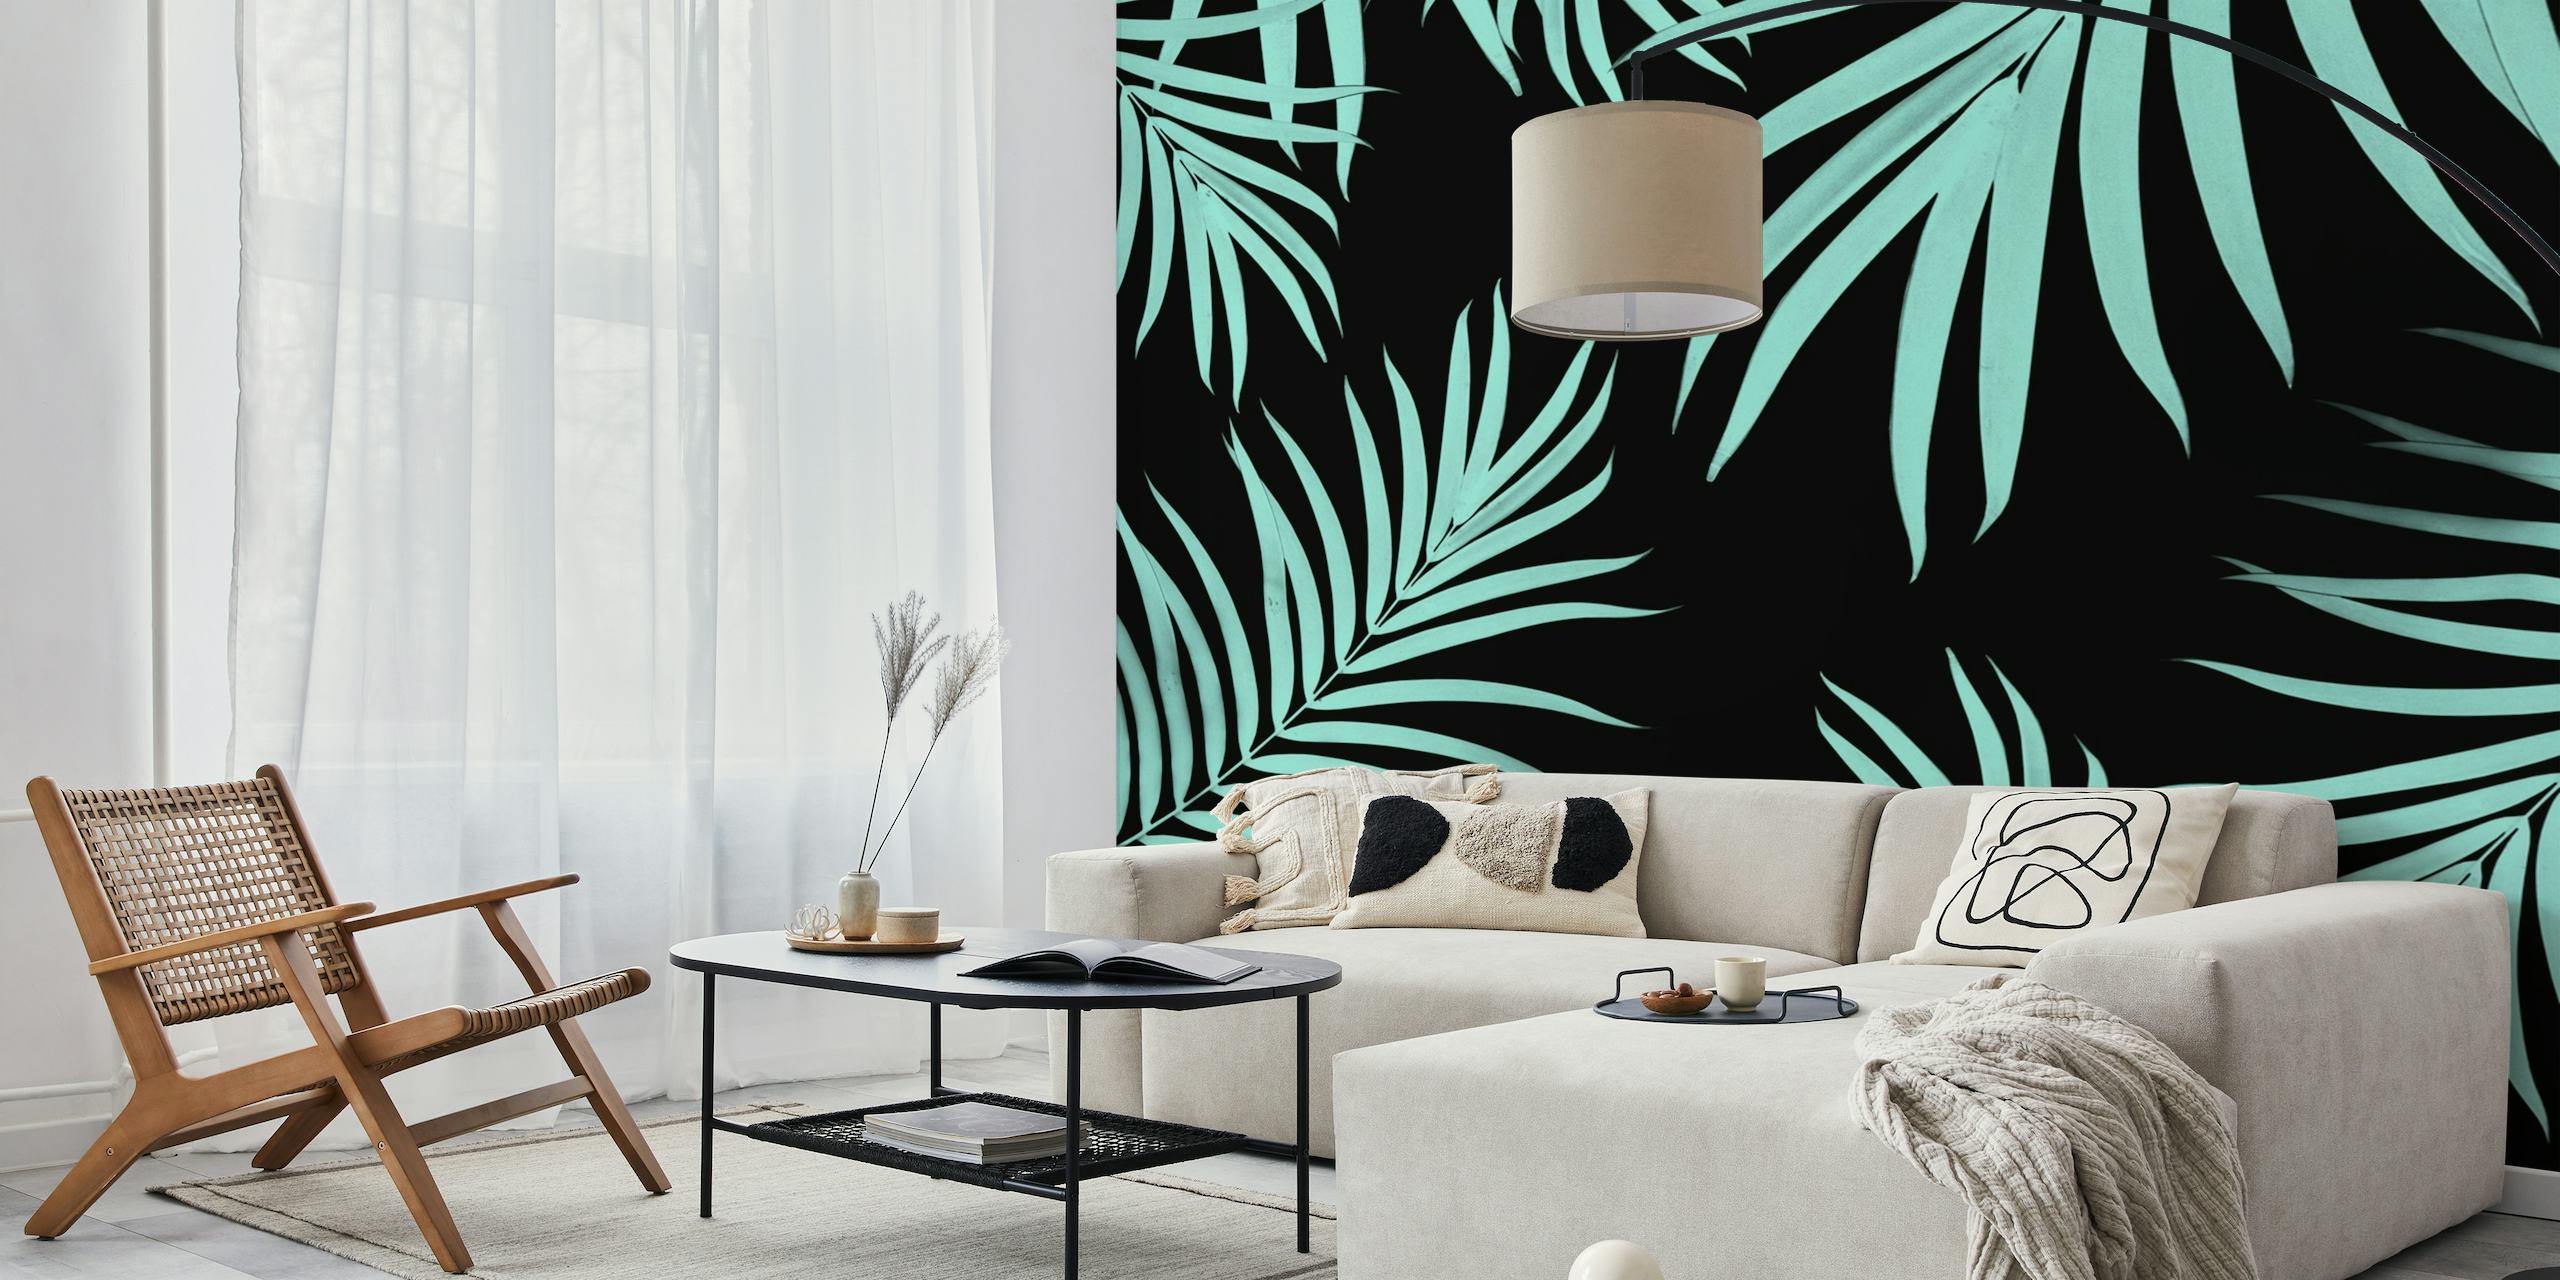 Teal palm leaves pattern on a black background wall mural